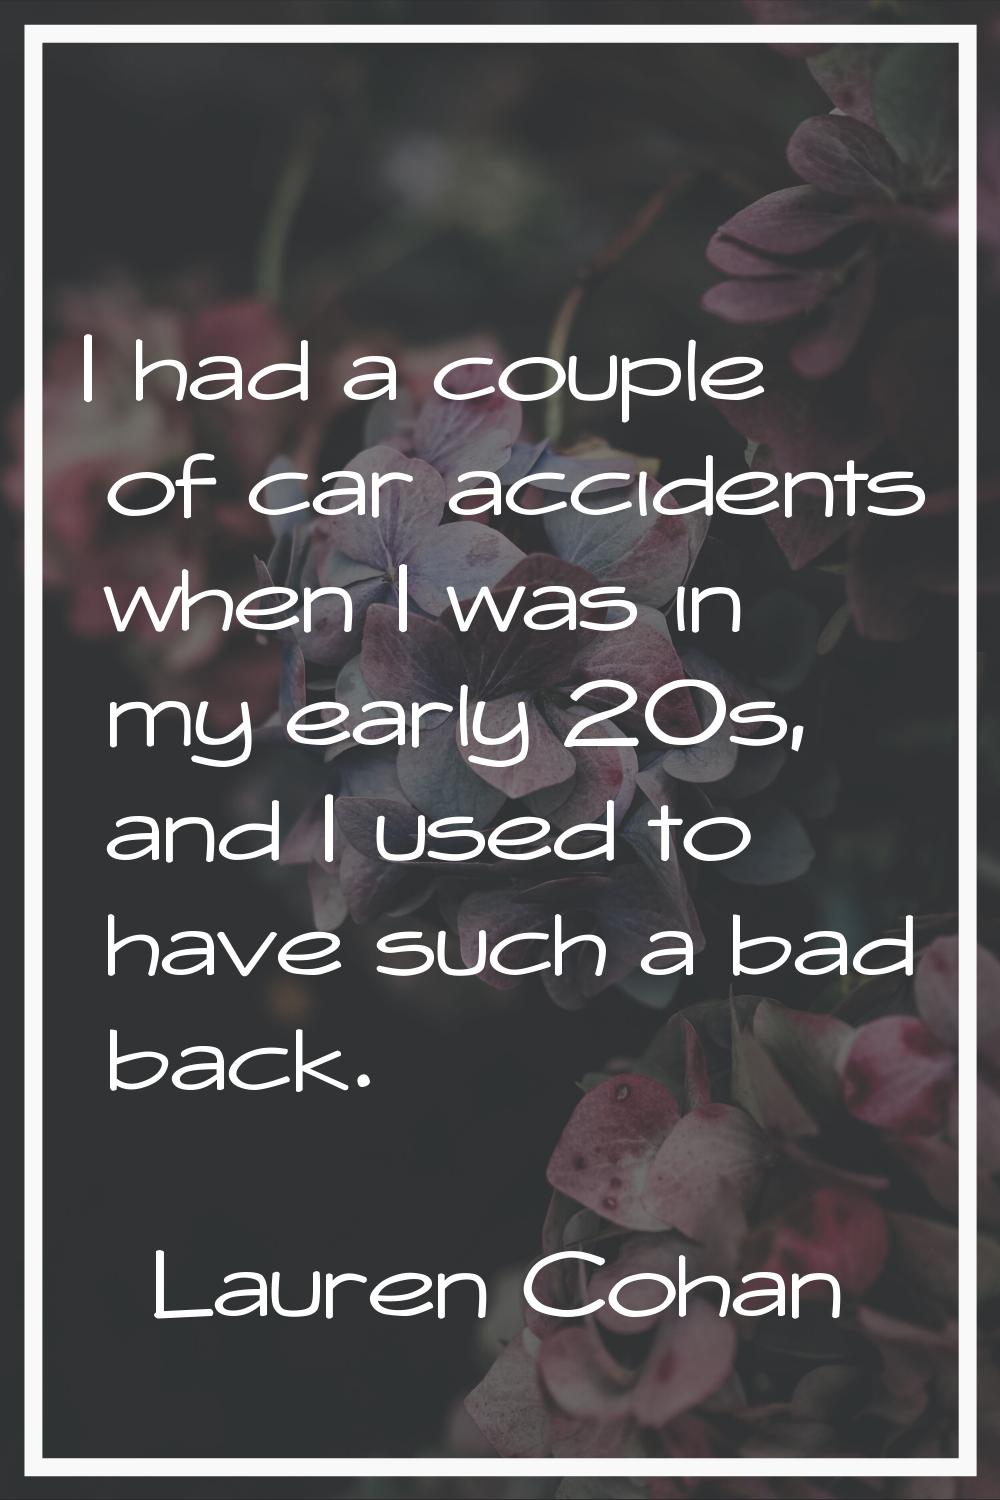 I had a couple of car accidents when I was in my early 20s, and I used to have such a bad back.